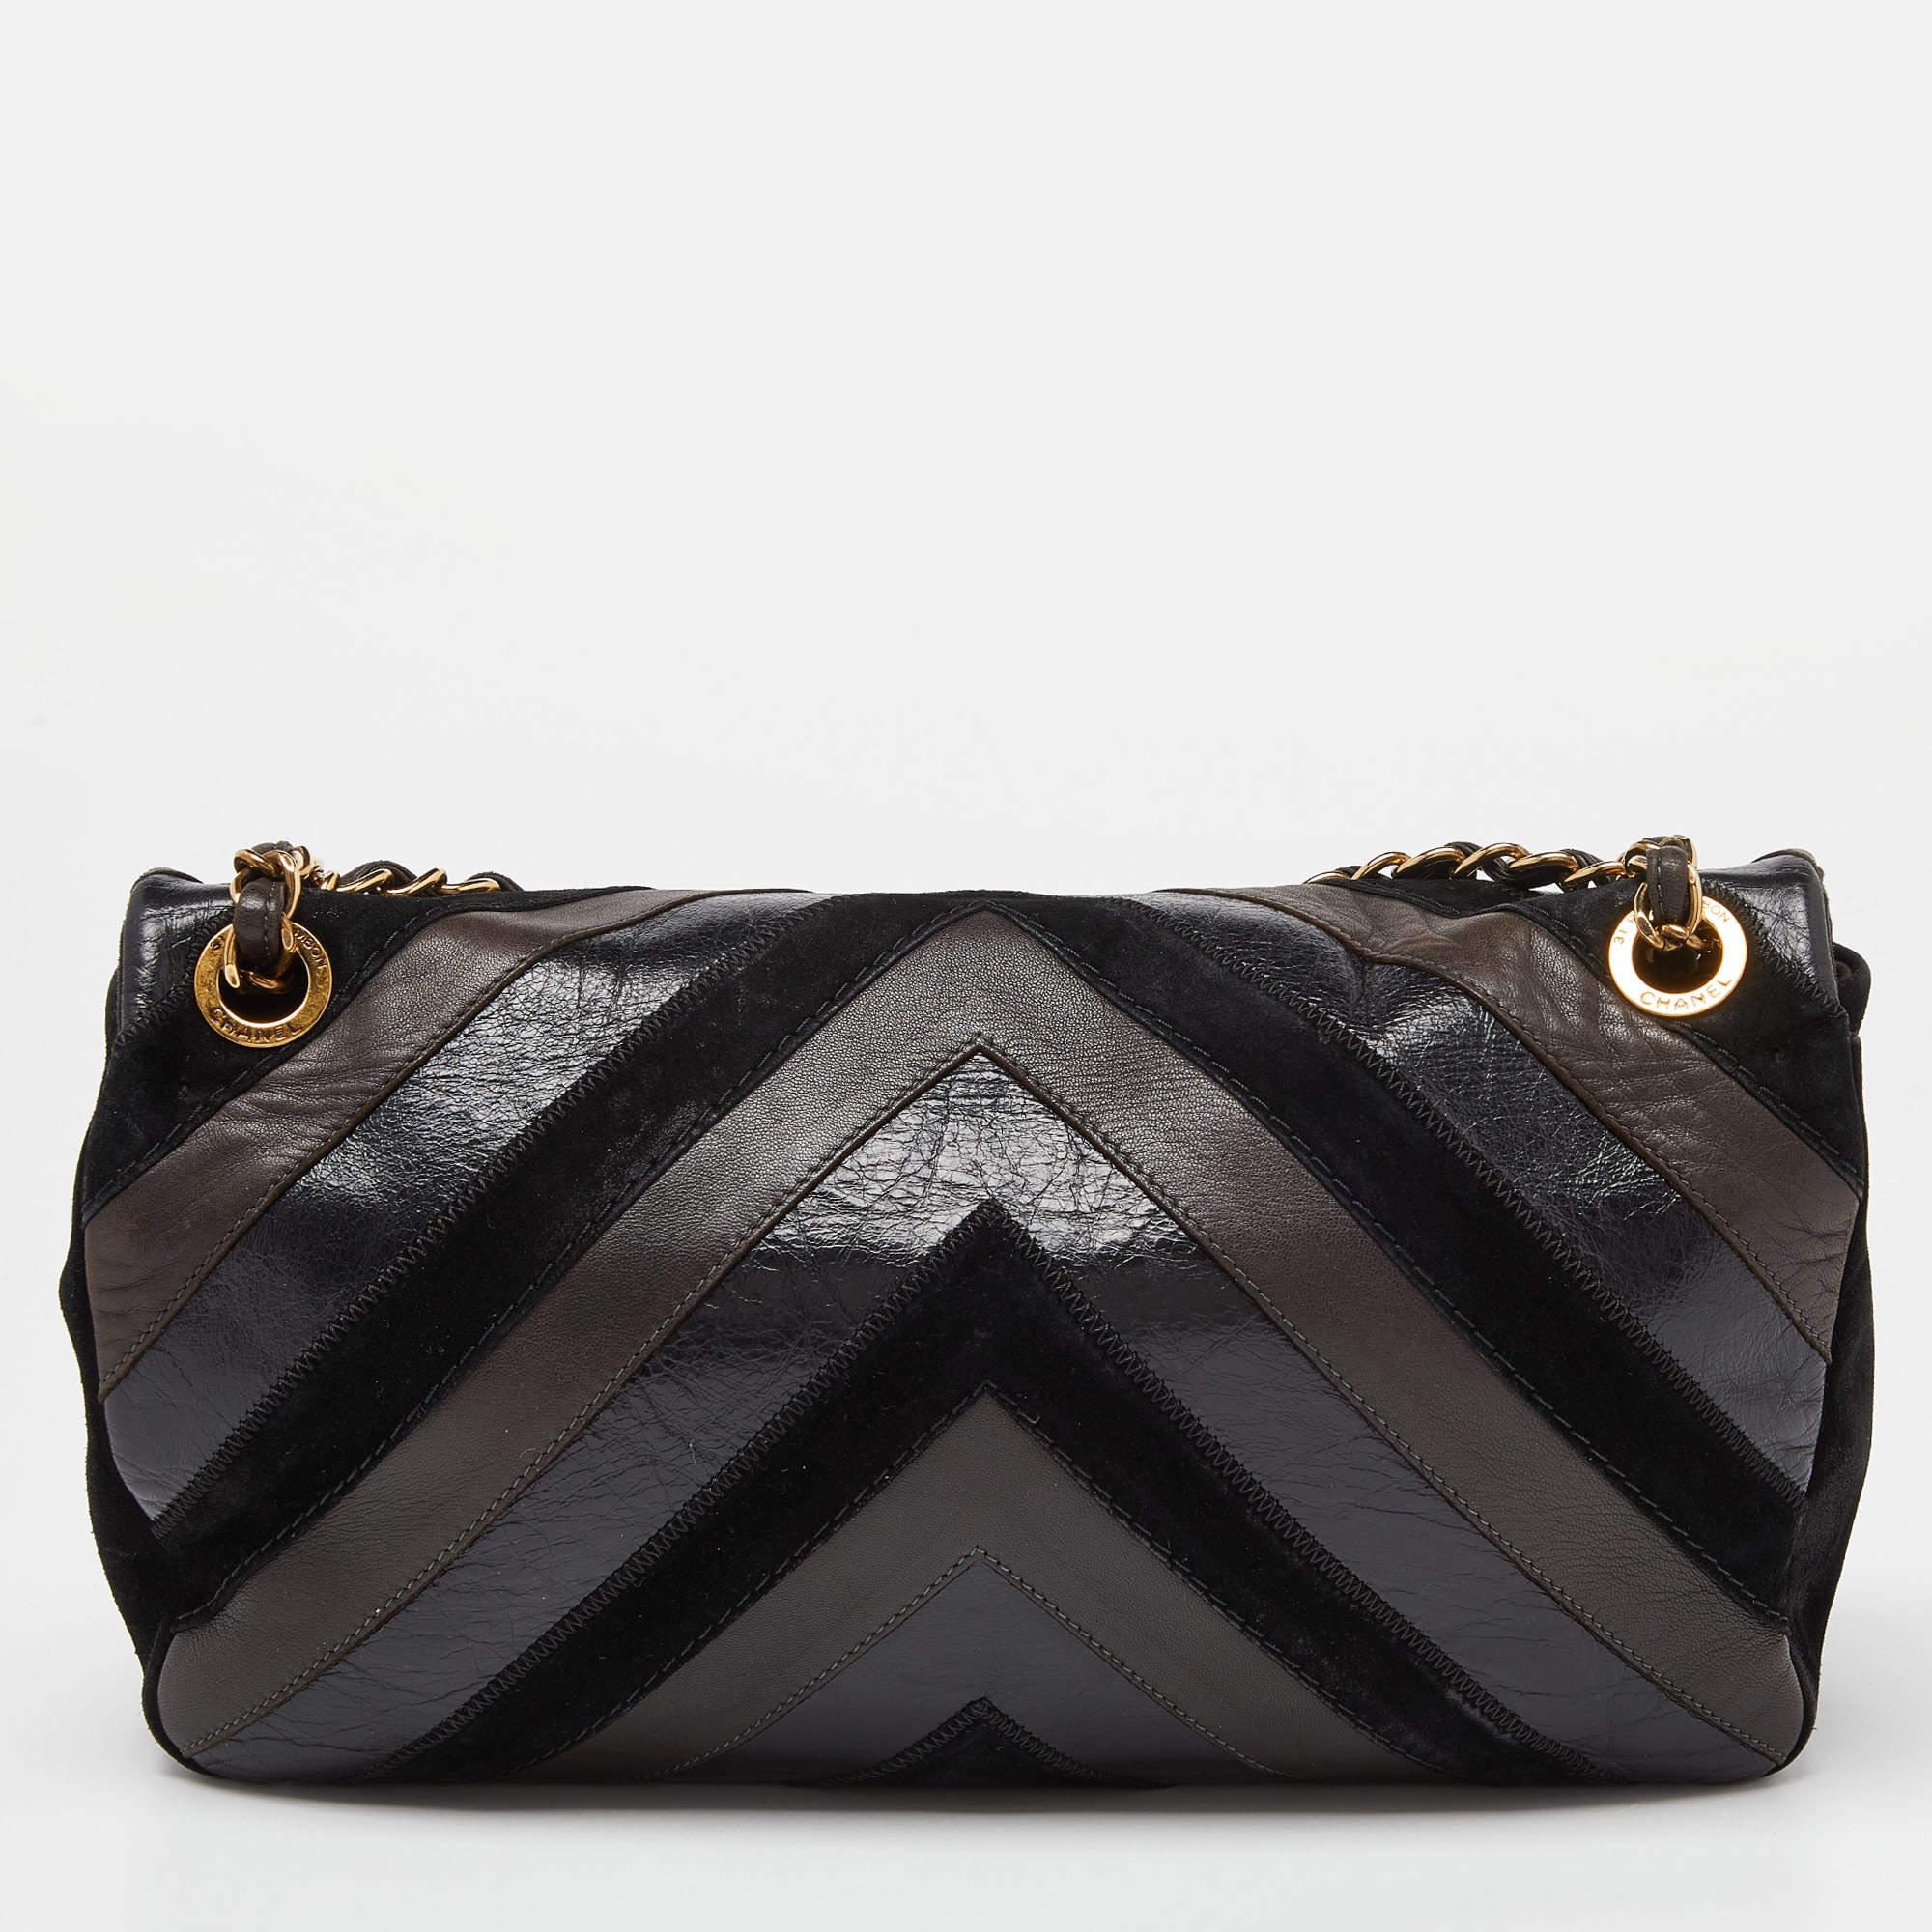 Women's Chanel Black/Brown Chevron Suede and Leather Flap Bag